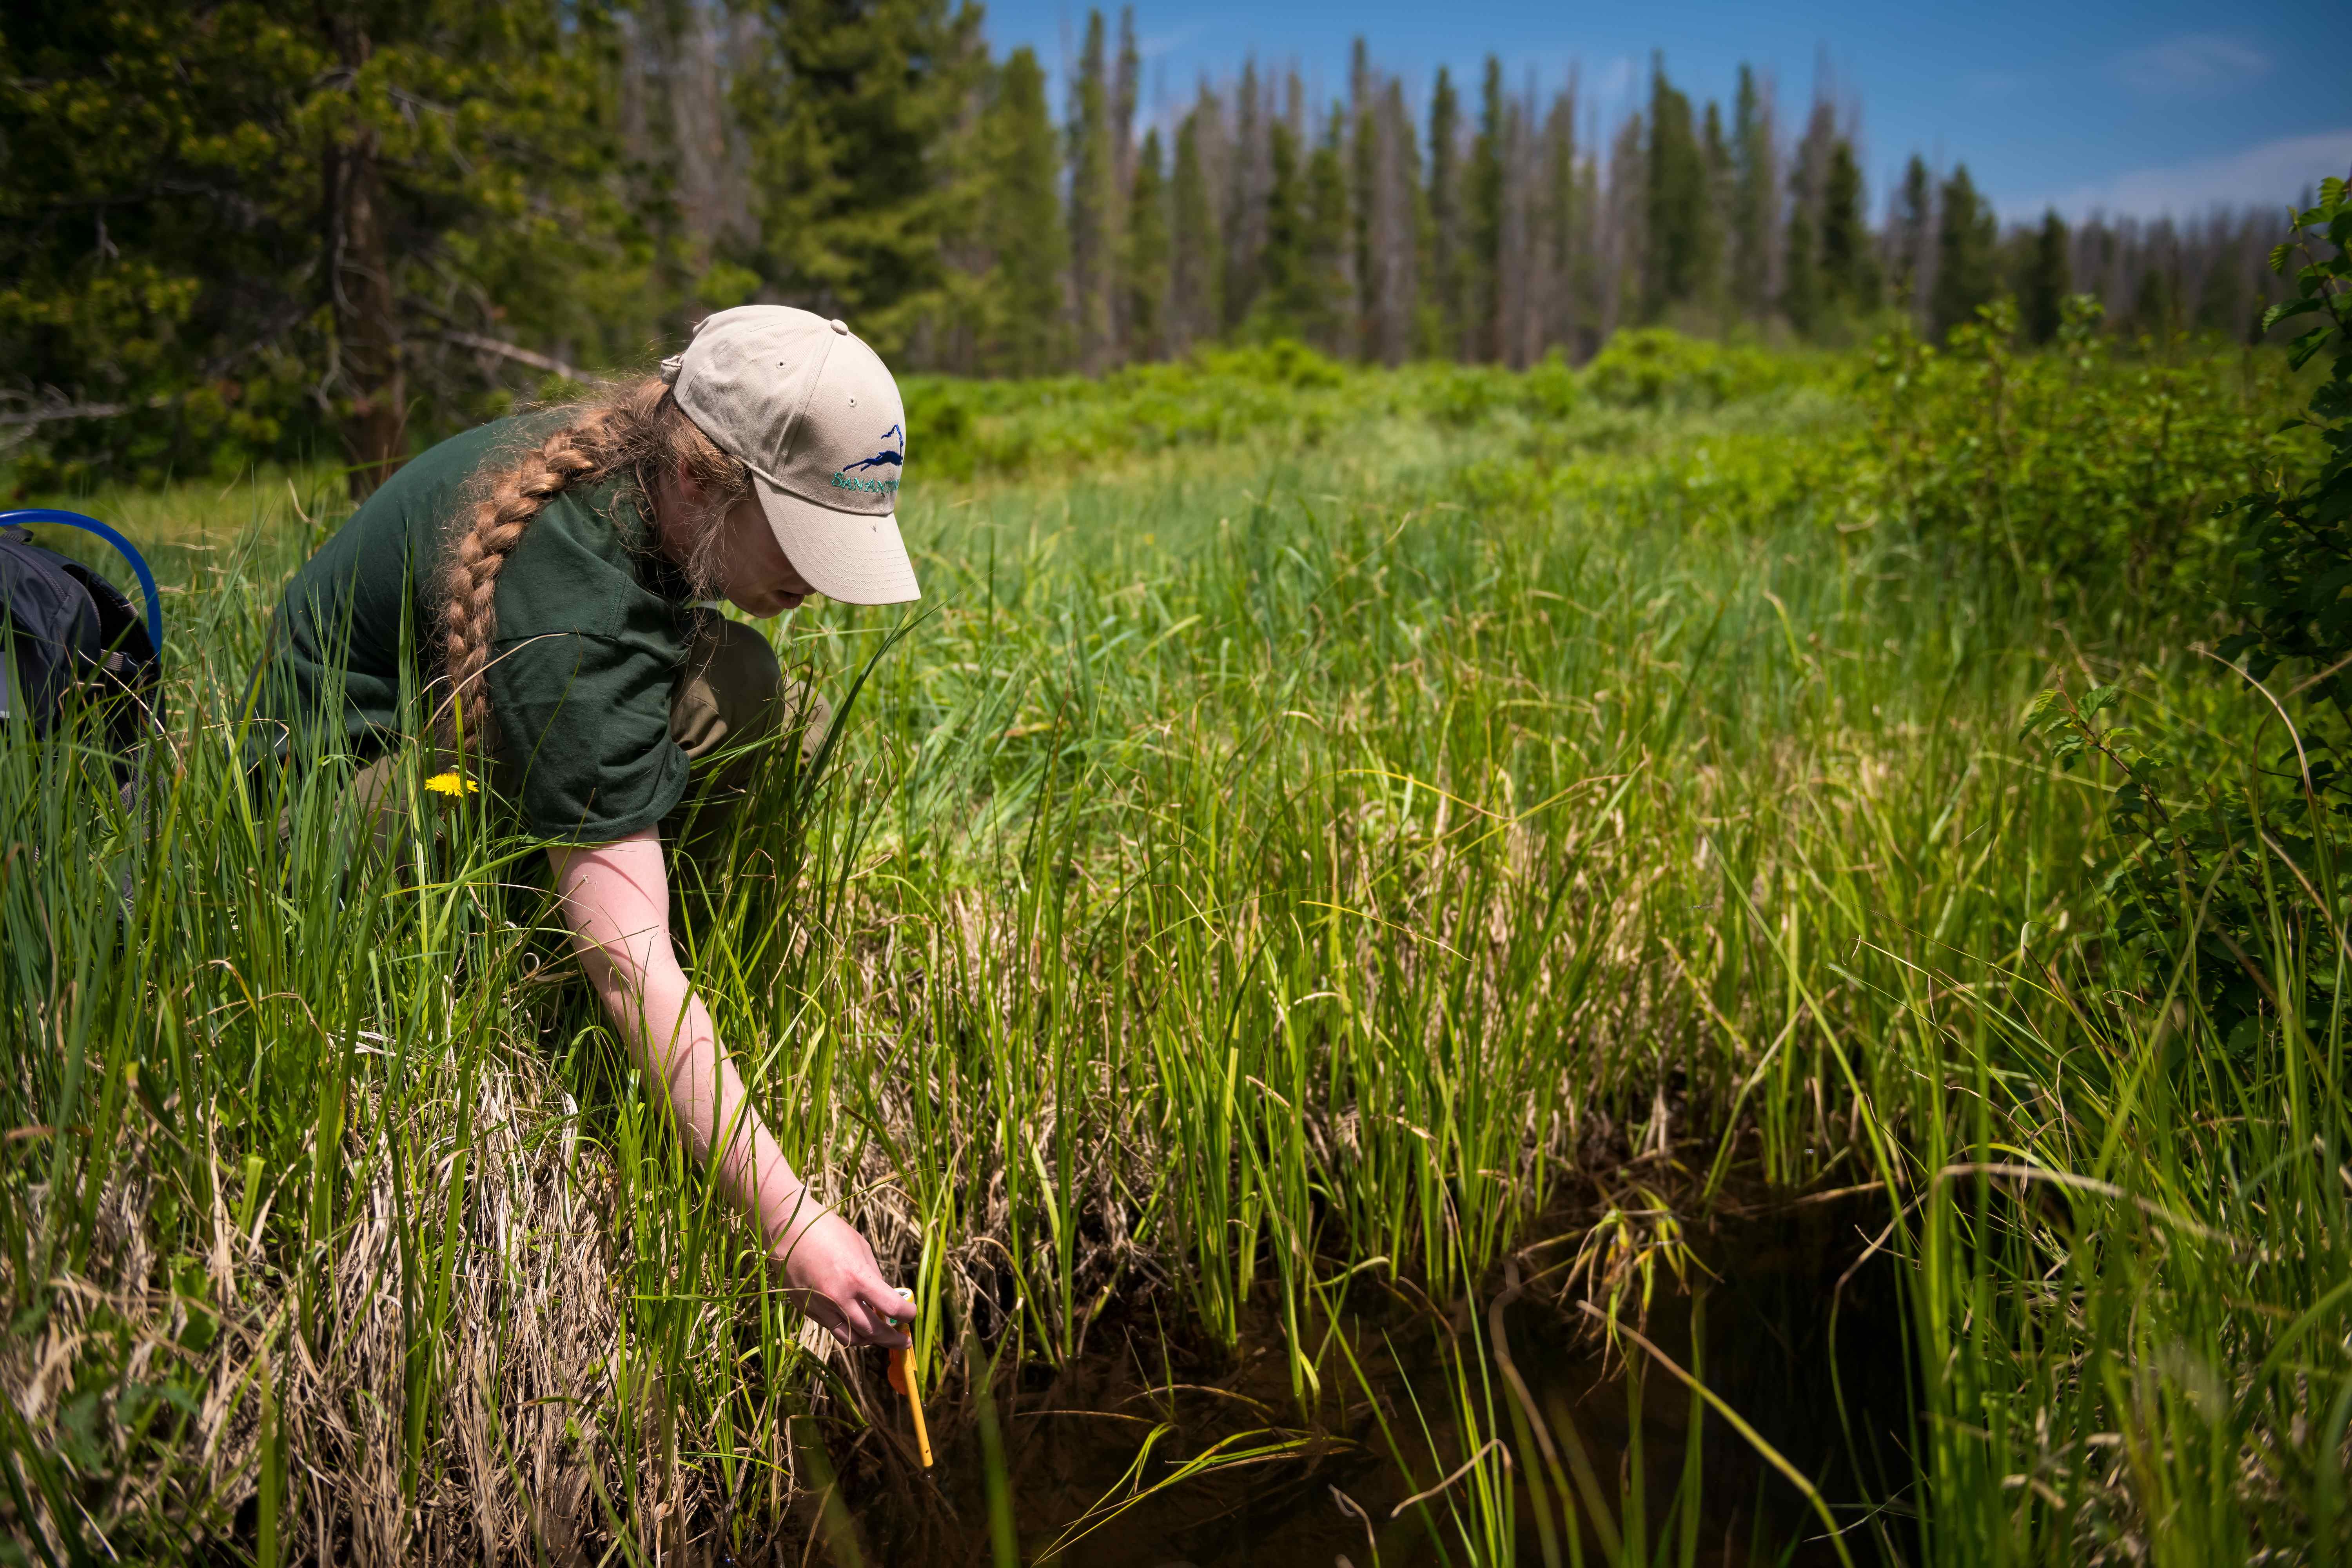 Researcher leans down to test water samples in marshy field area